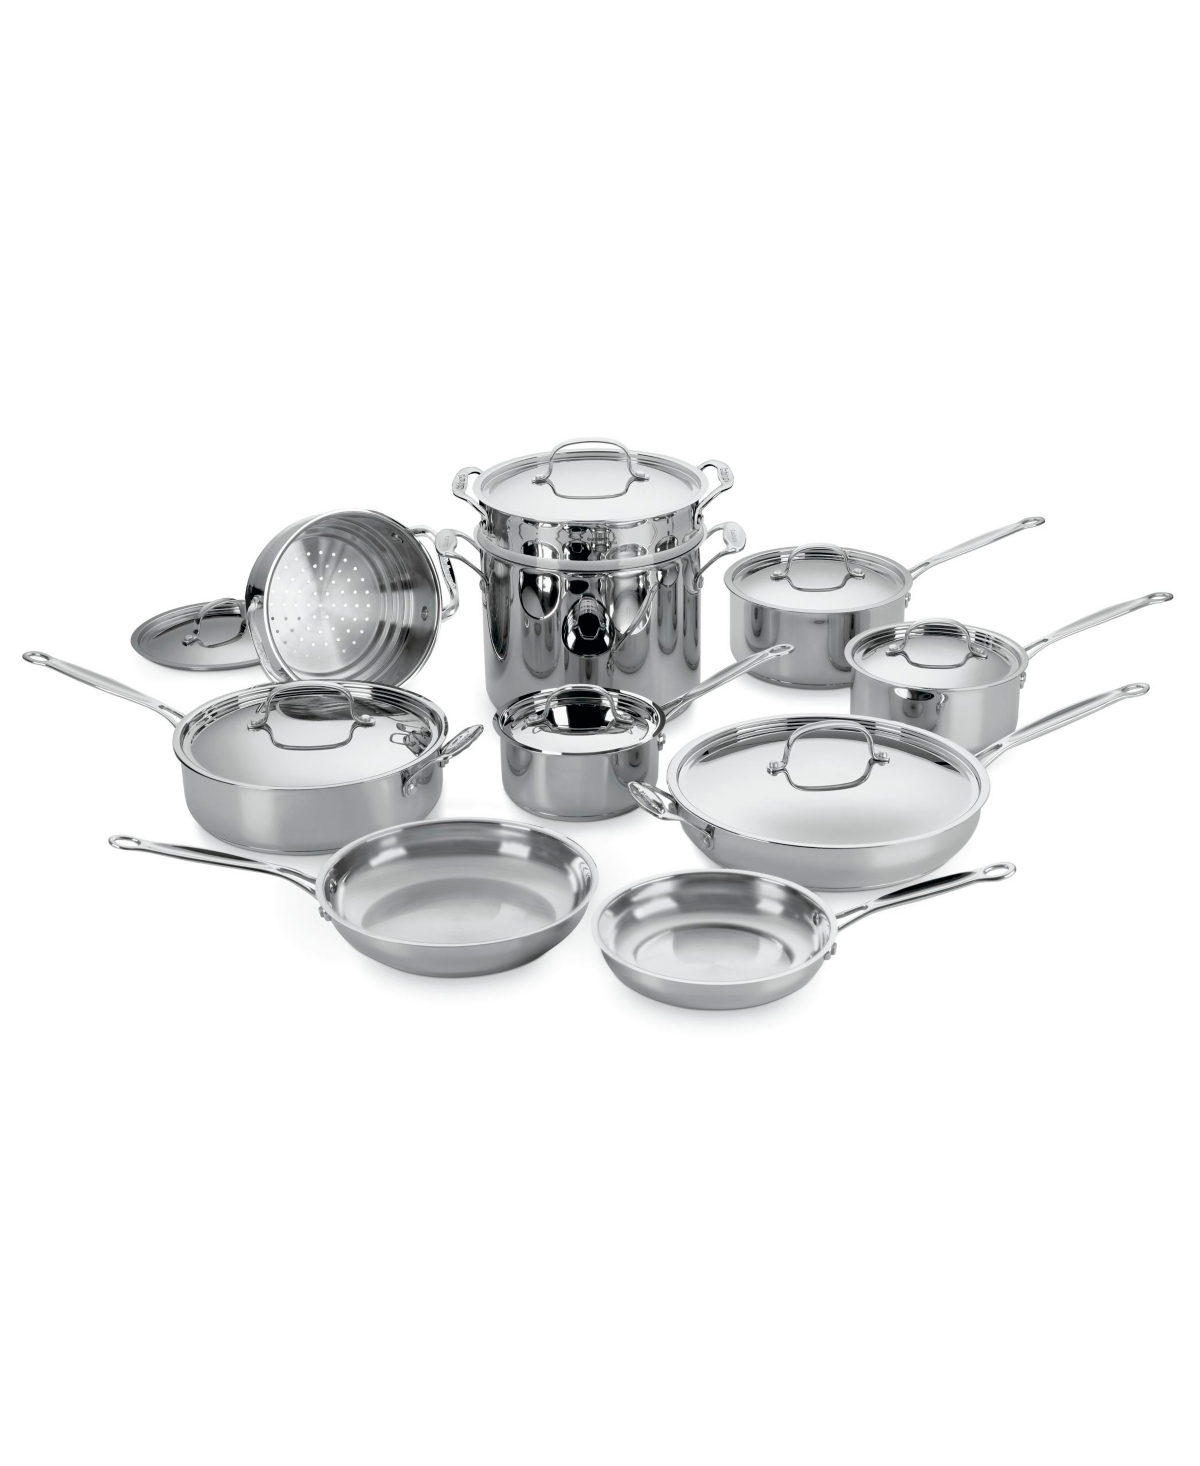 Cuisinart Chefs Classic Stainless 17-pc. Cookware Set In Stainless Steel